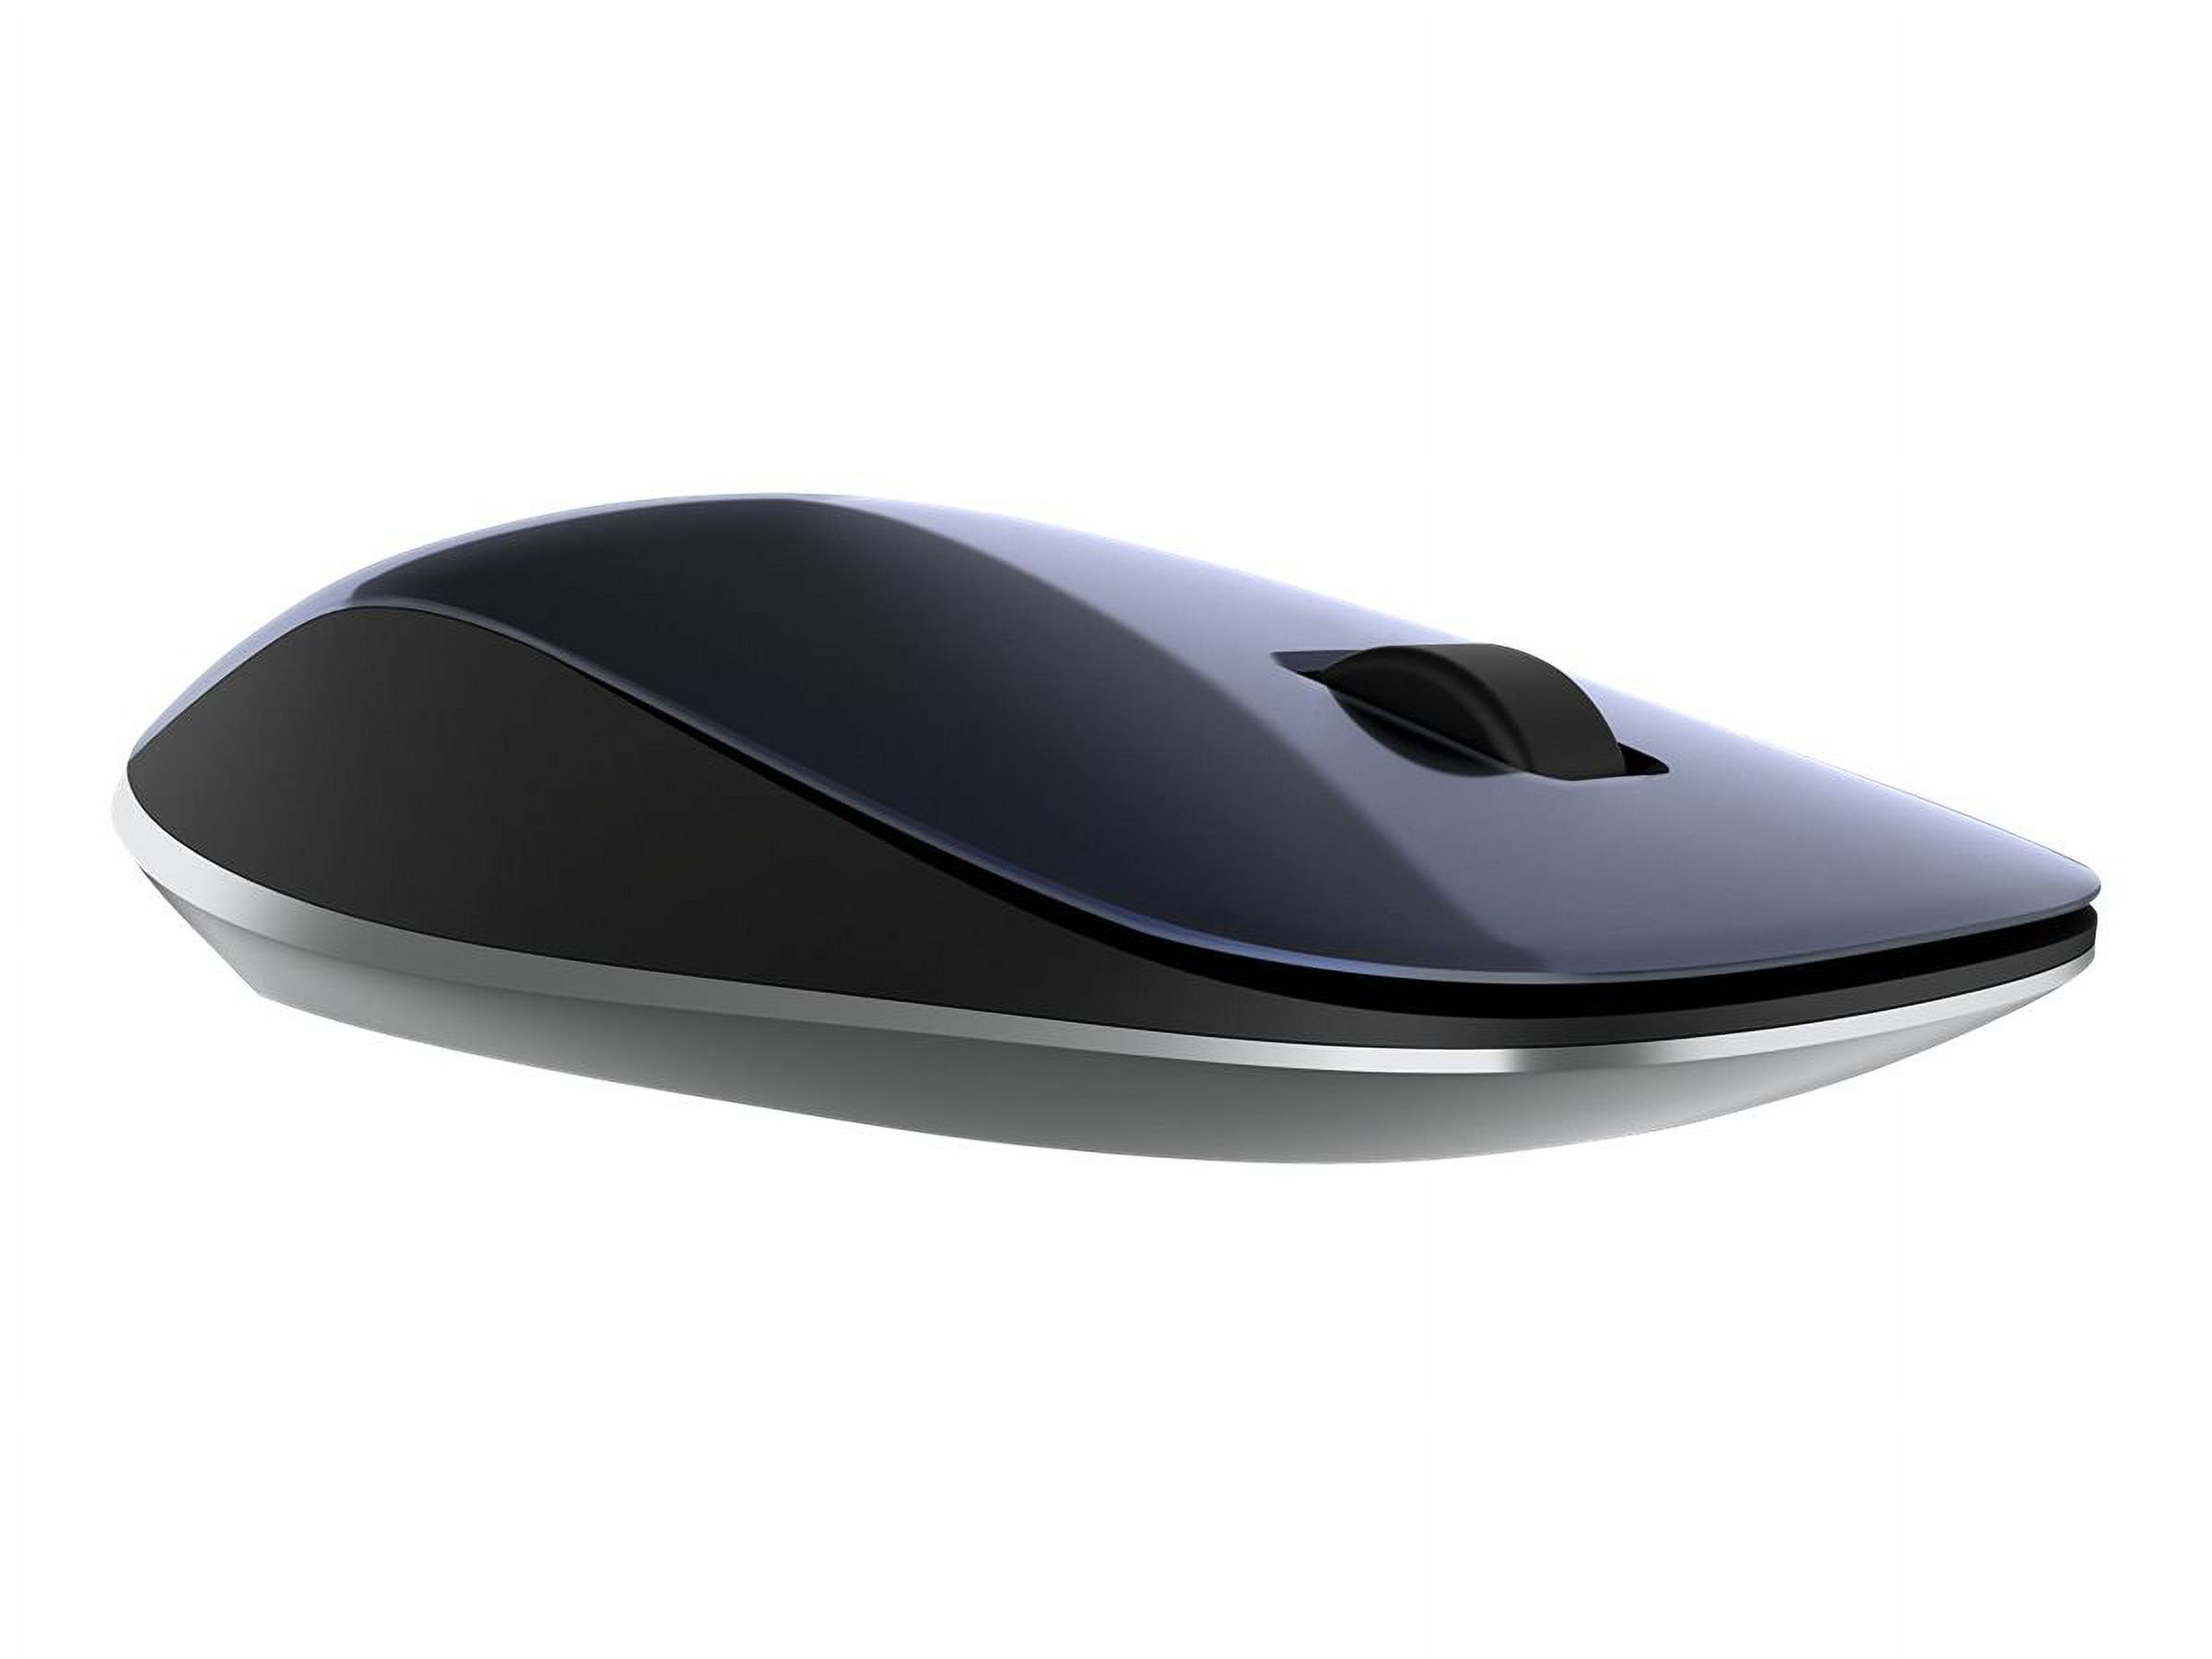 HP Wireless Mouse Z4000 (Blue) - image 4 of 5